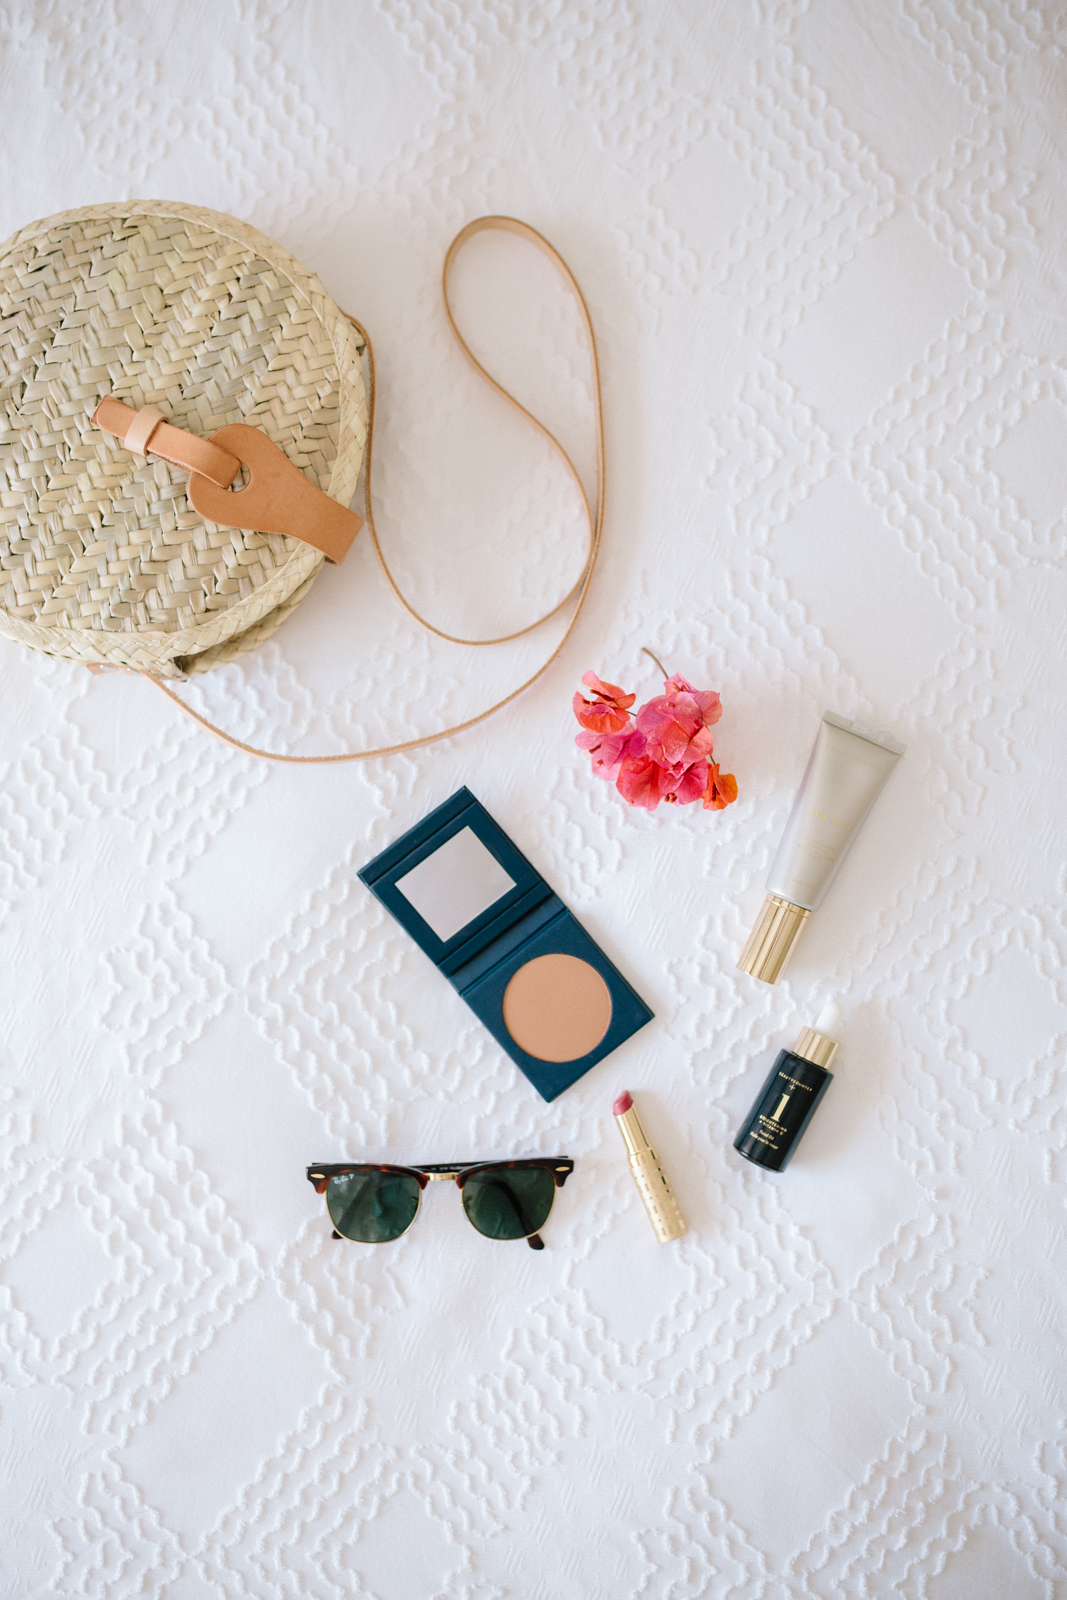 How_to_Update_Your_Makeup_Bag_for_Clean_Summer_Beauty